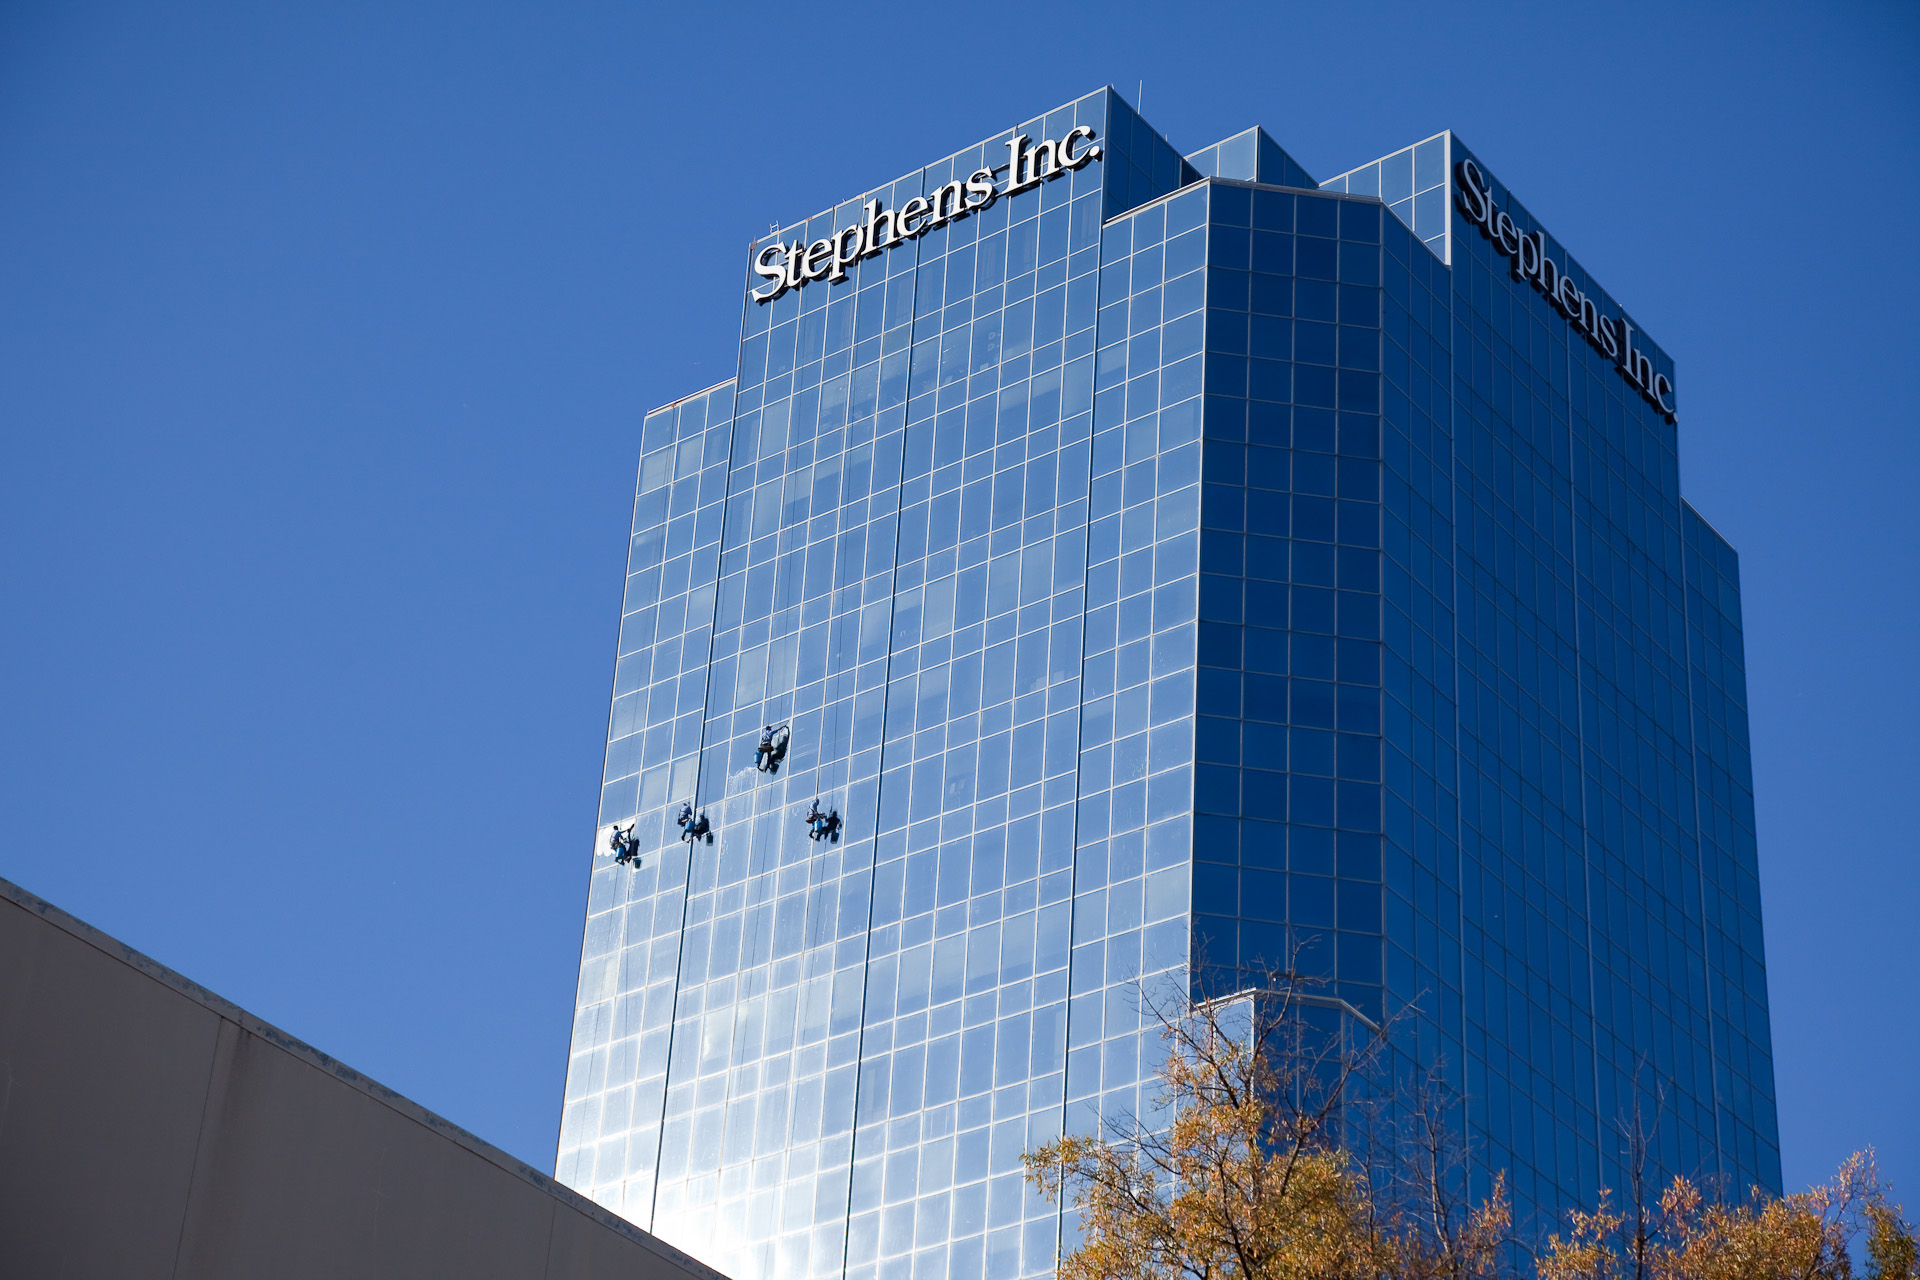 Fall Cleaning at the Stephens Building, Little Rock, Arkansas